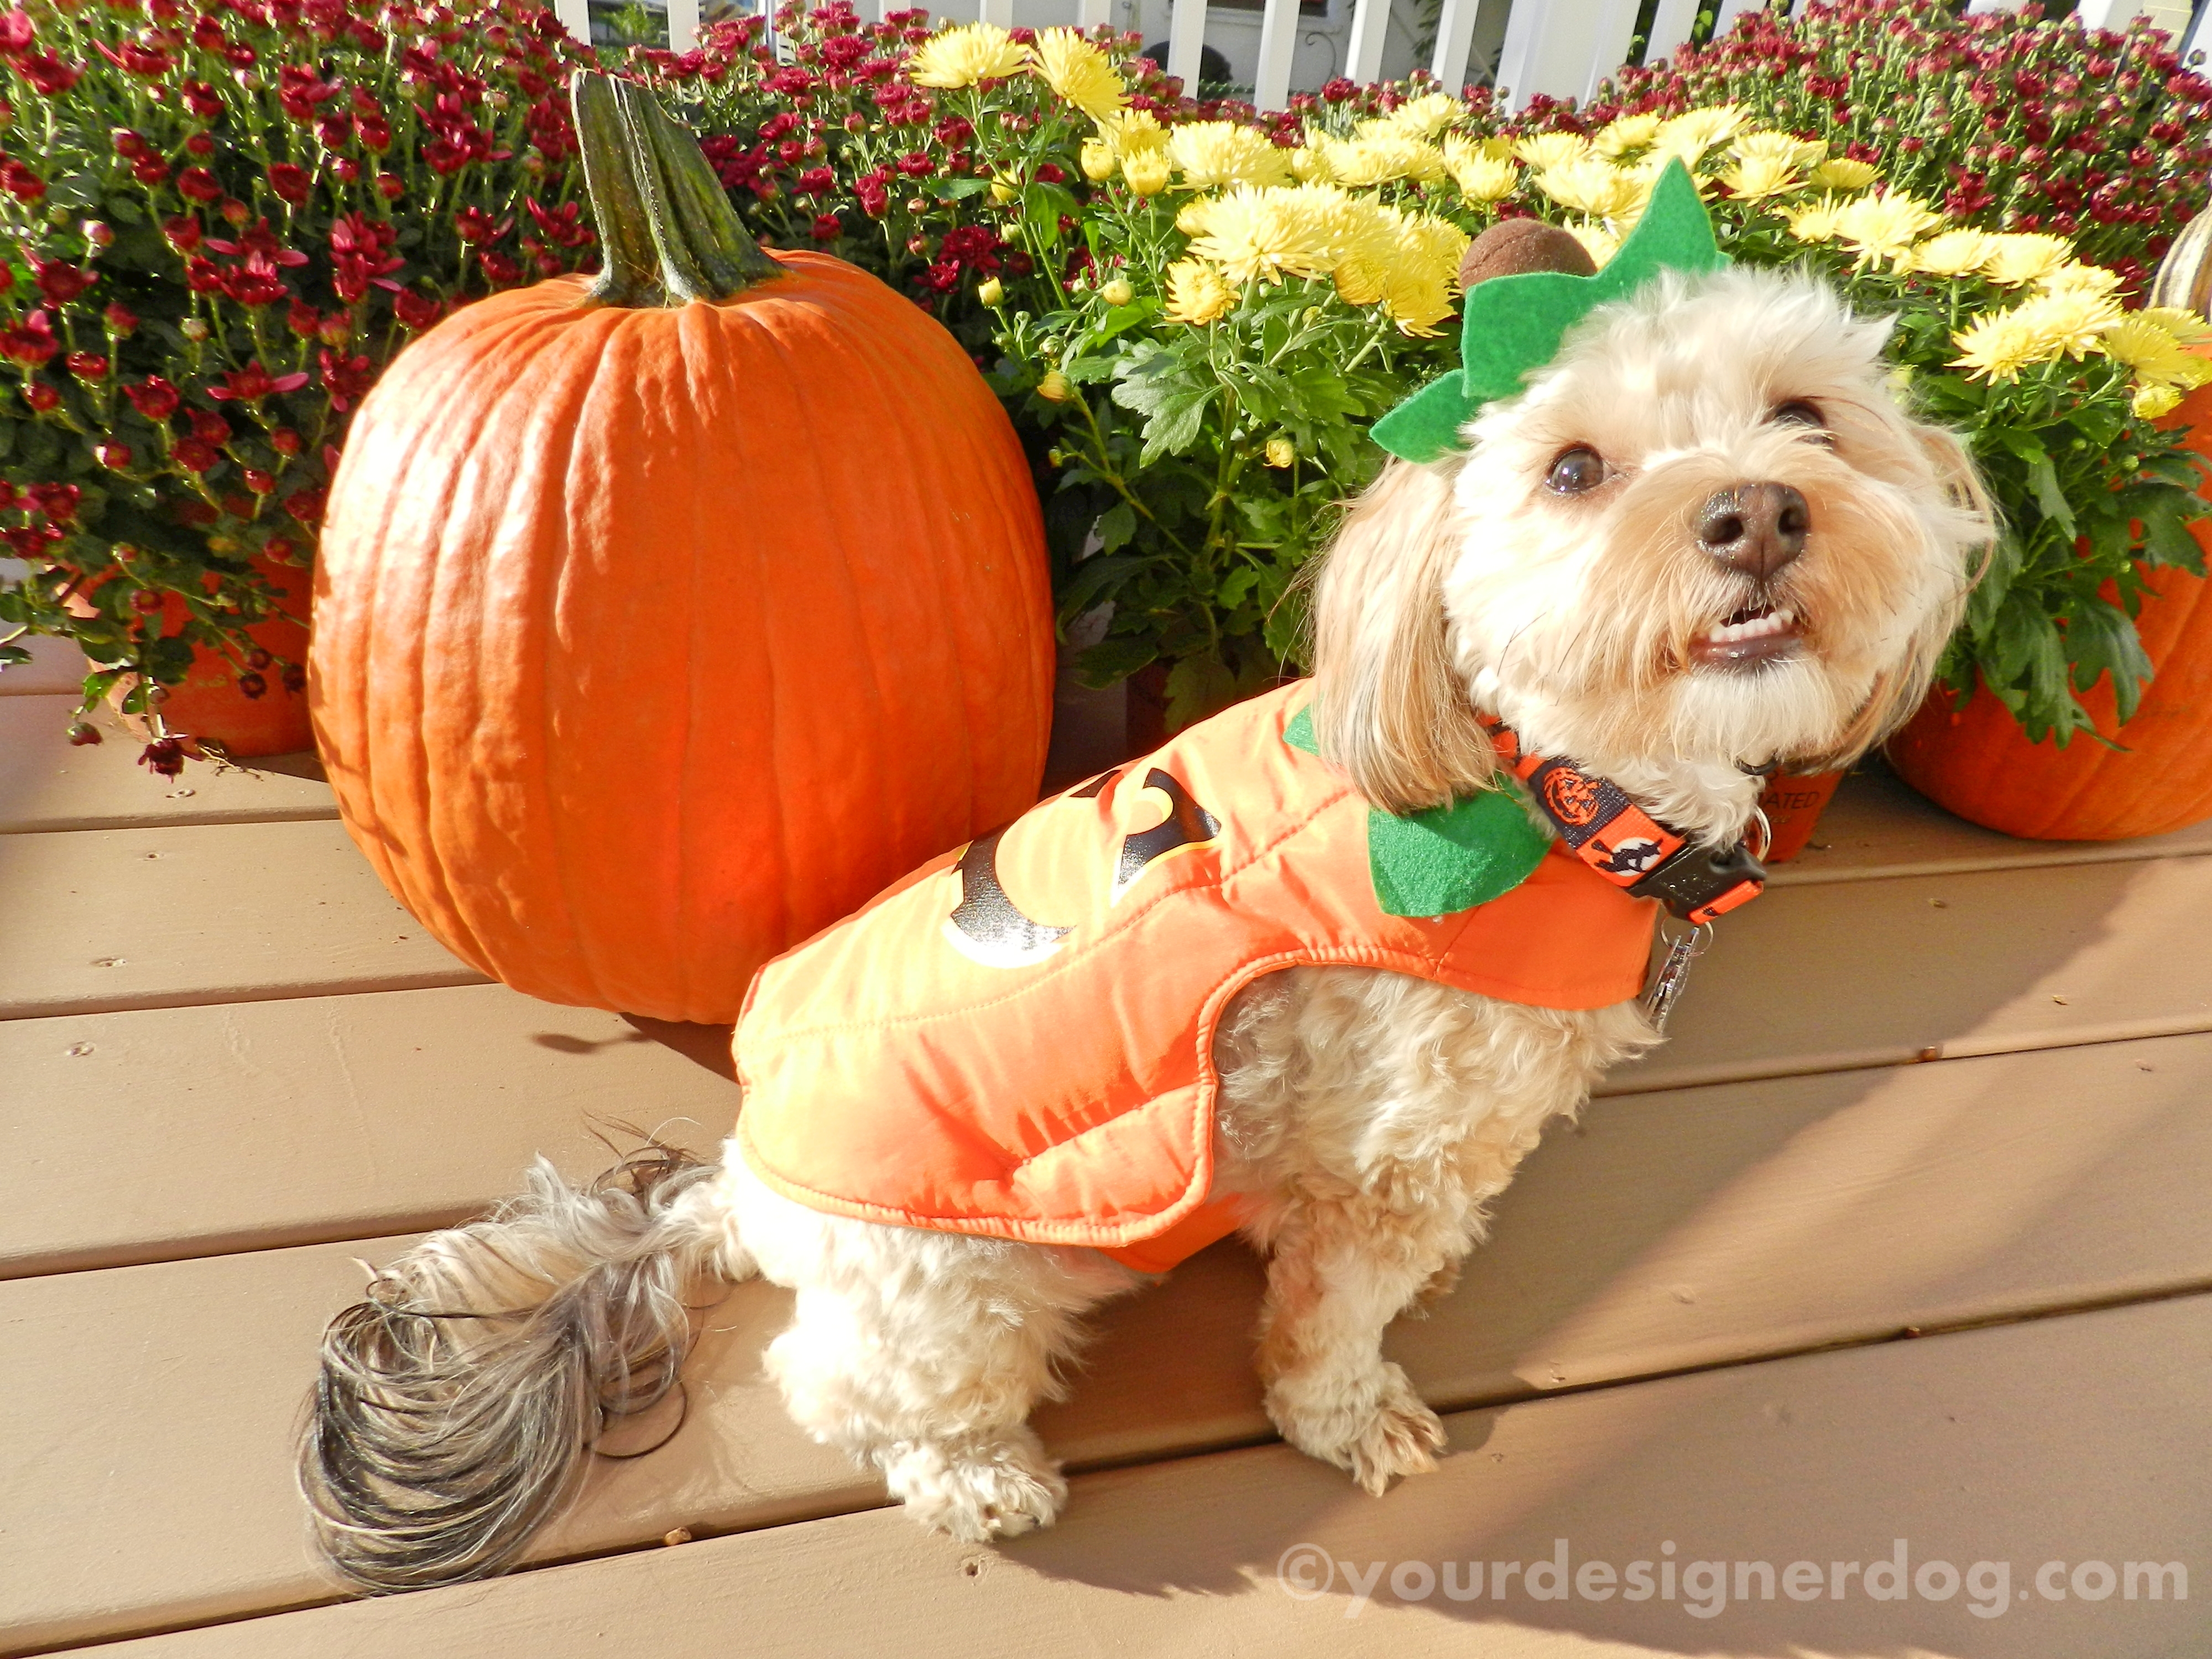 dogs, designer dogs, yorkipoo, yorkie poo, pumpkins, fall, halloween, dogs with flowers, mums, dogs smiling